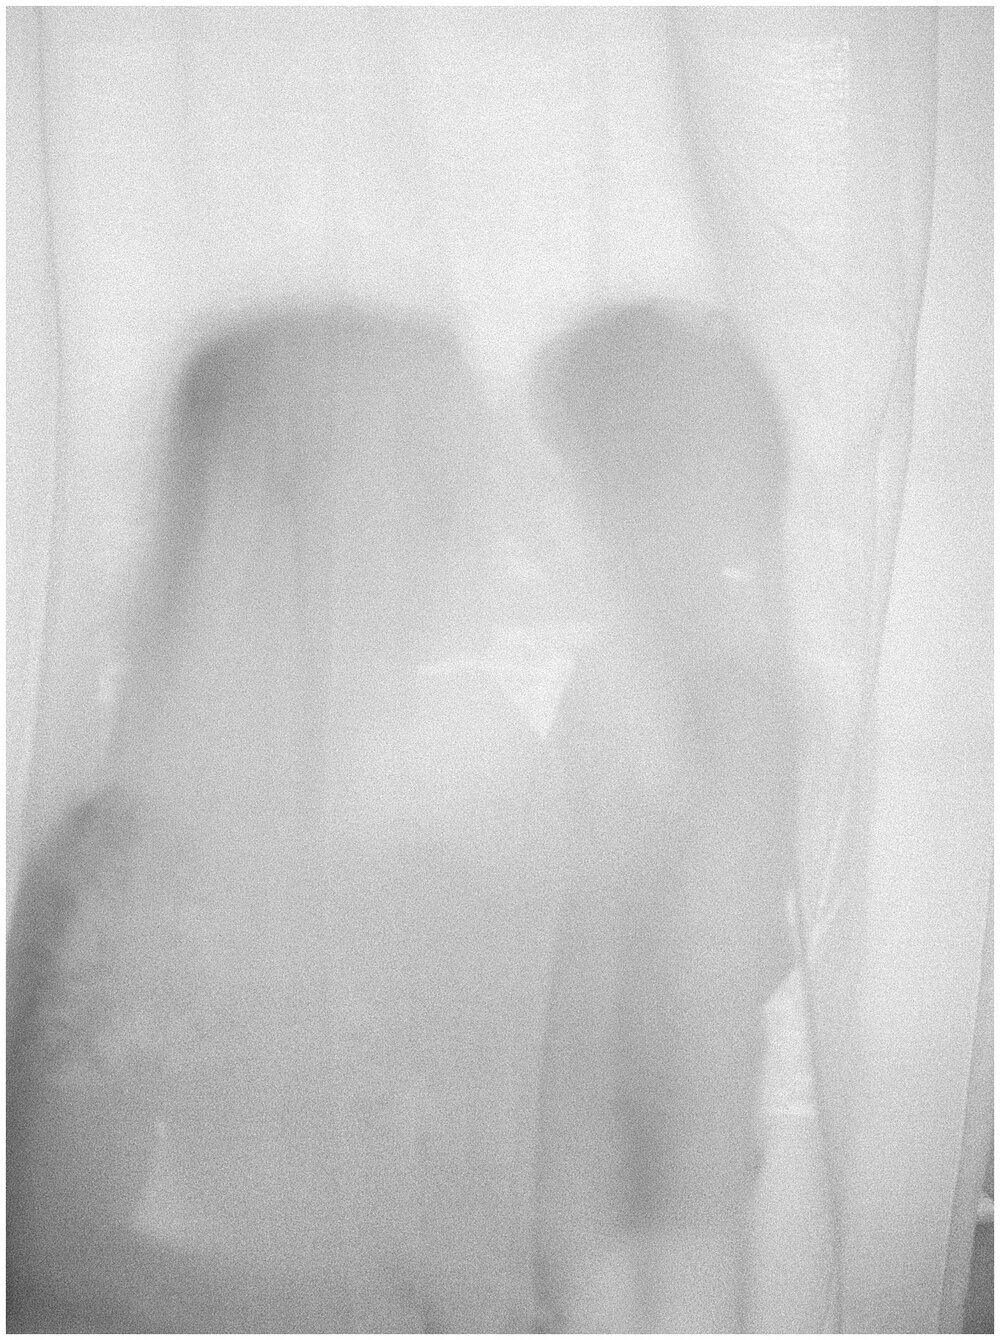 Mother and son behind a curtain.